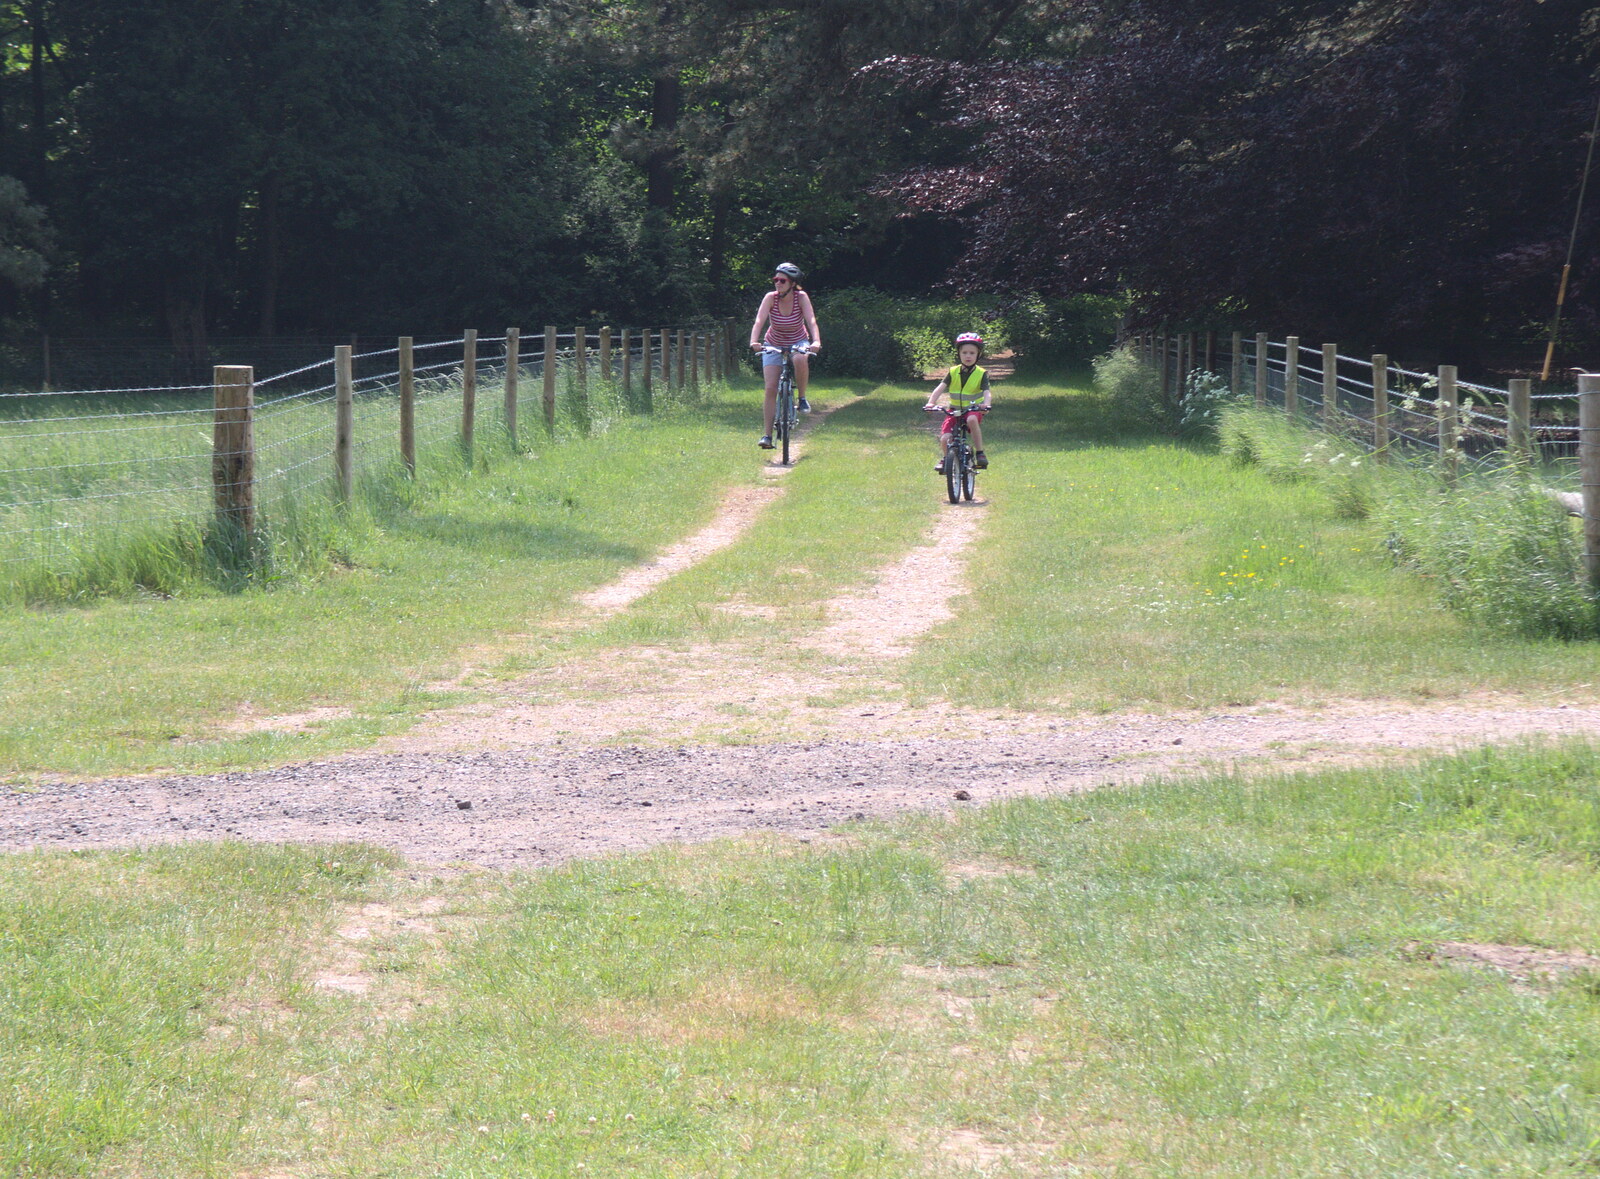 Isobel and Harry on bikes from Dower House Camping, West Harling, Norfolk - 27th May 2018